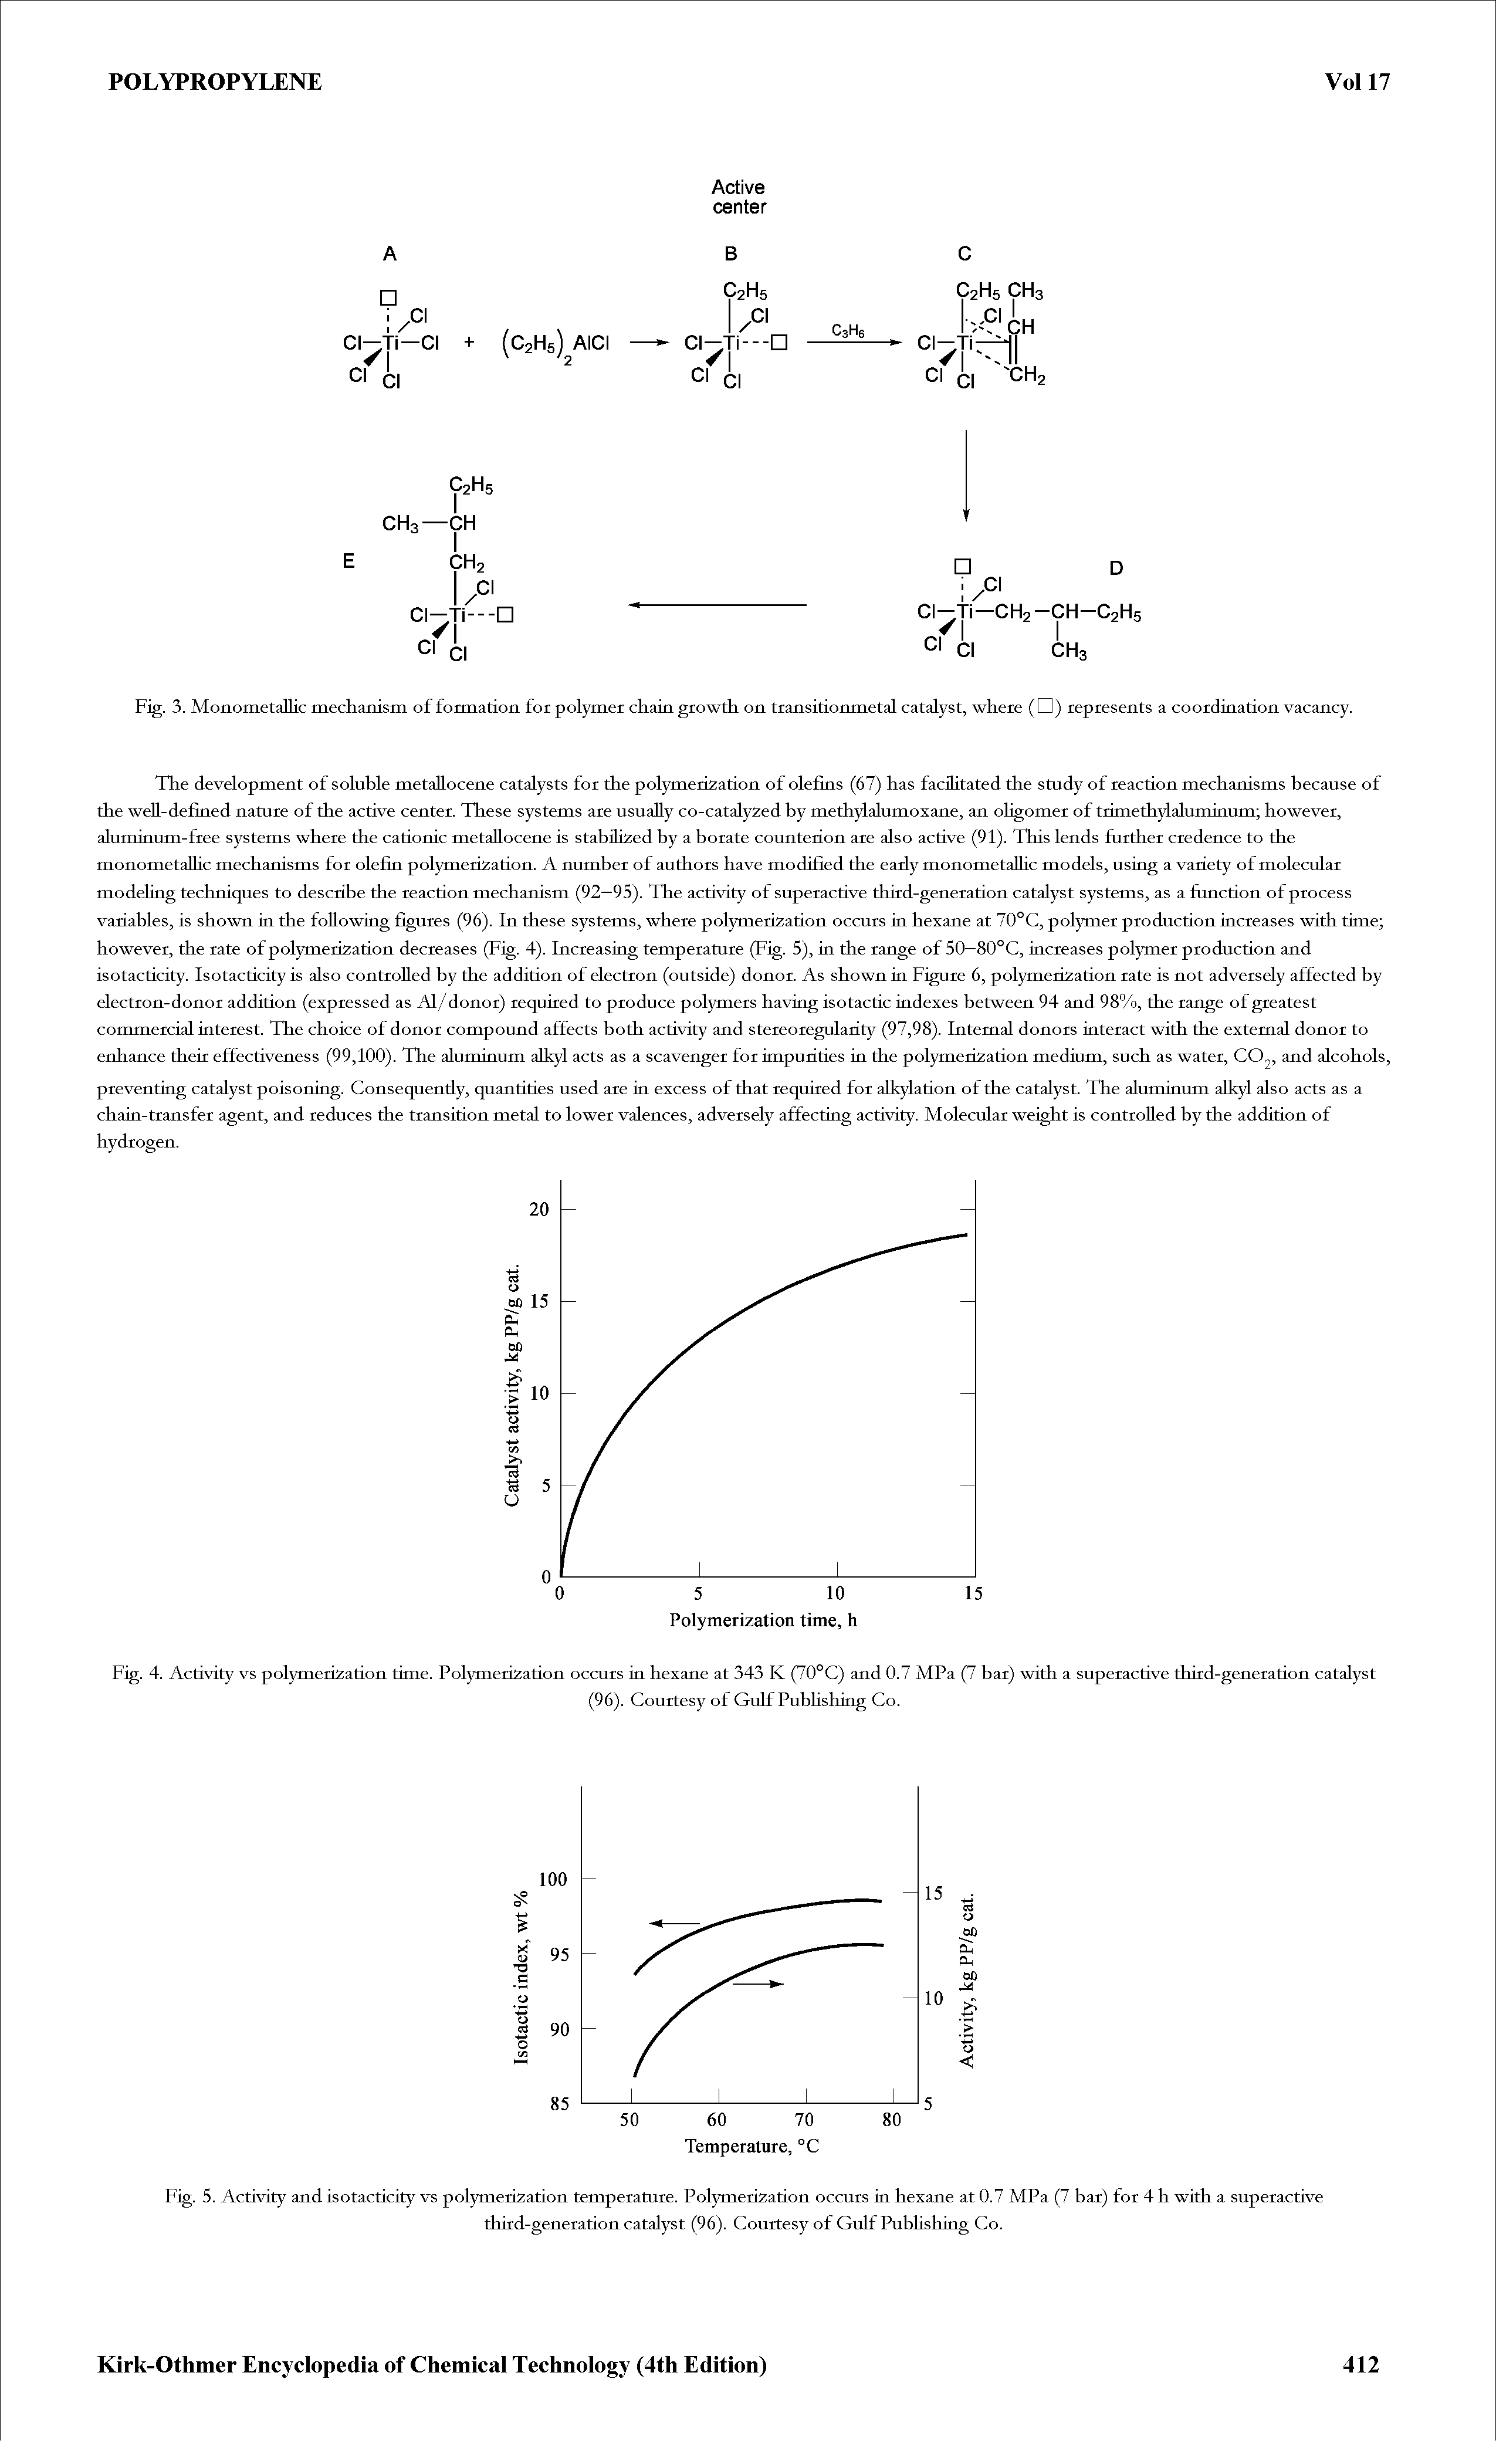 Fig. 4. Activity vs polymerization time. Polymerization occurs in hexane at 343 K (70°C) and 0.7 MPa (7 bat) with a superactive third-generation catalyst...